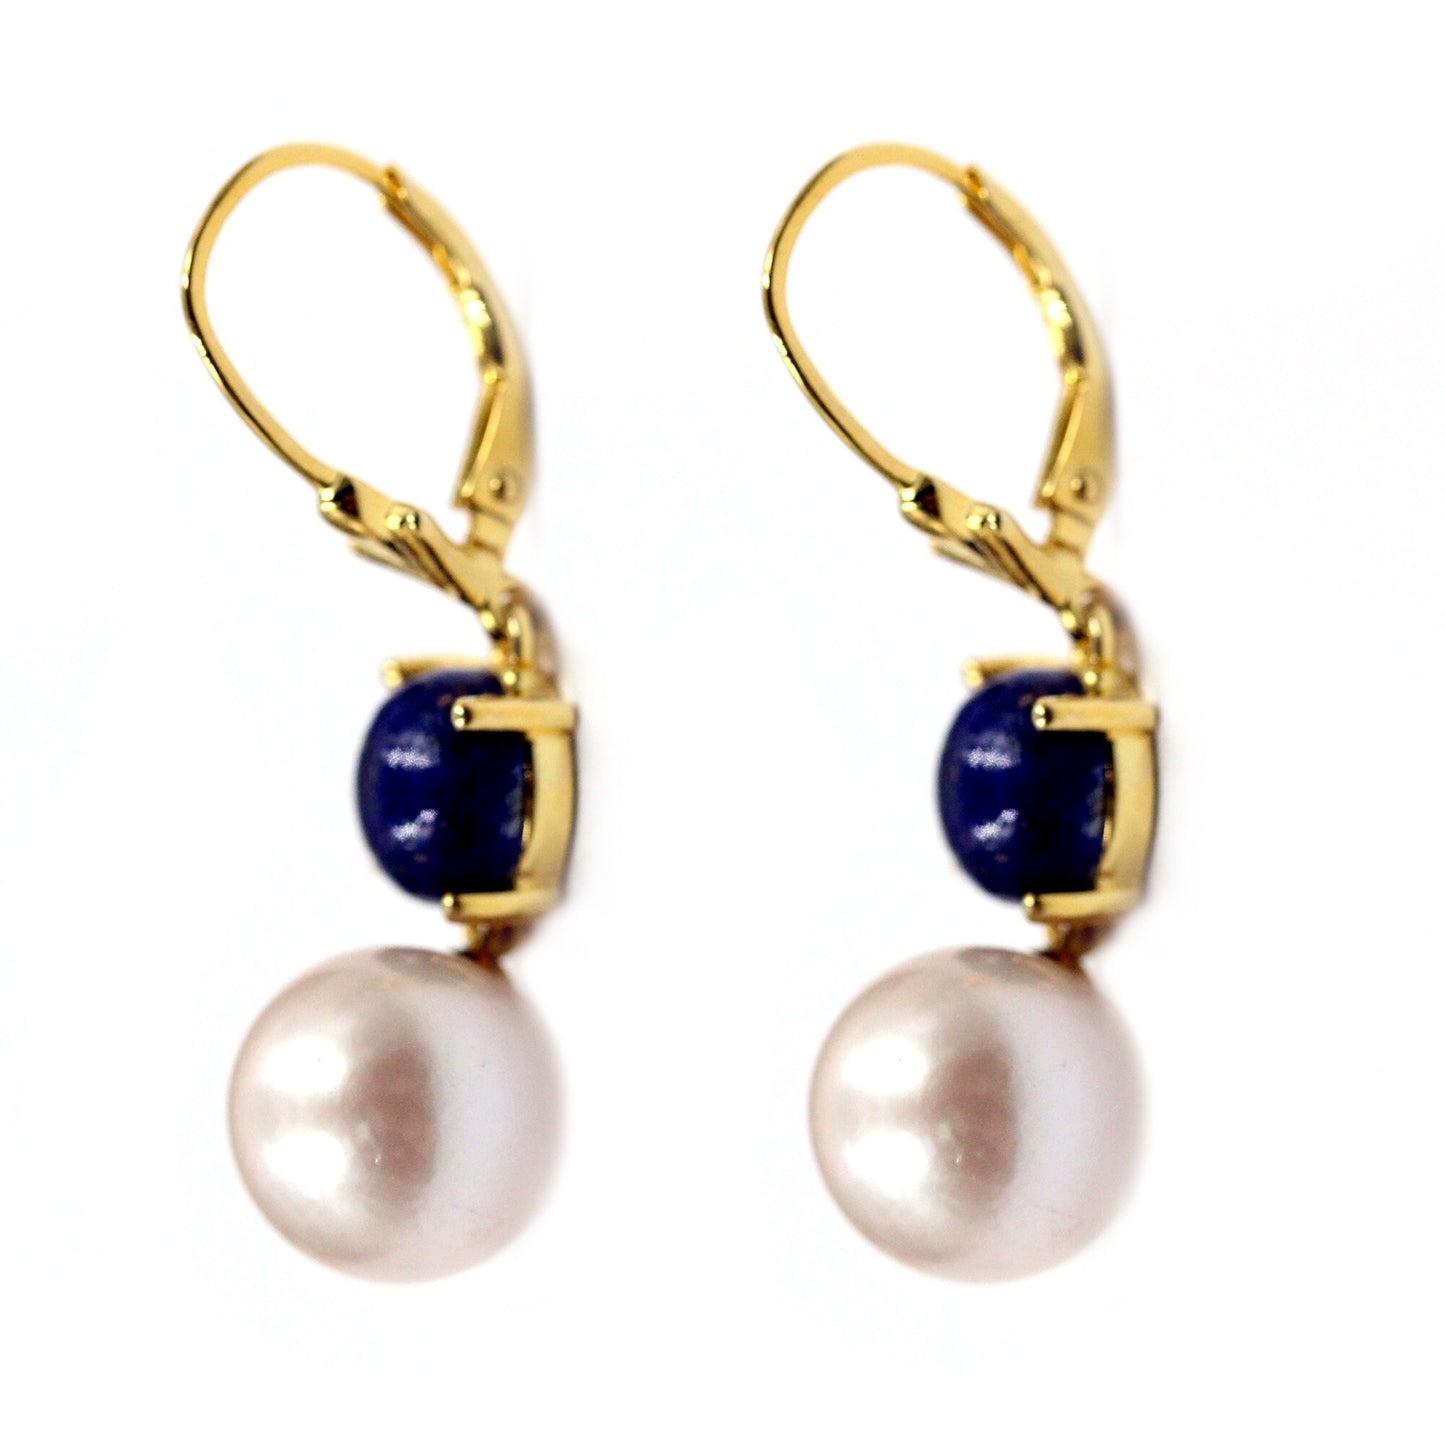 Natural Pearl With Lapis Lazuli Gemstone Earrings, 925 Sterling Silver Over Gold Plated Drop Earrings, Gift For Her